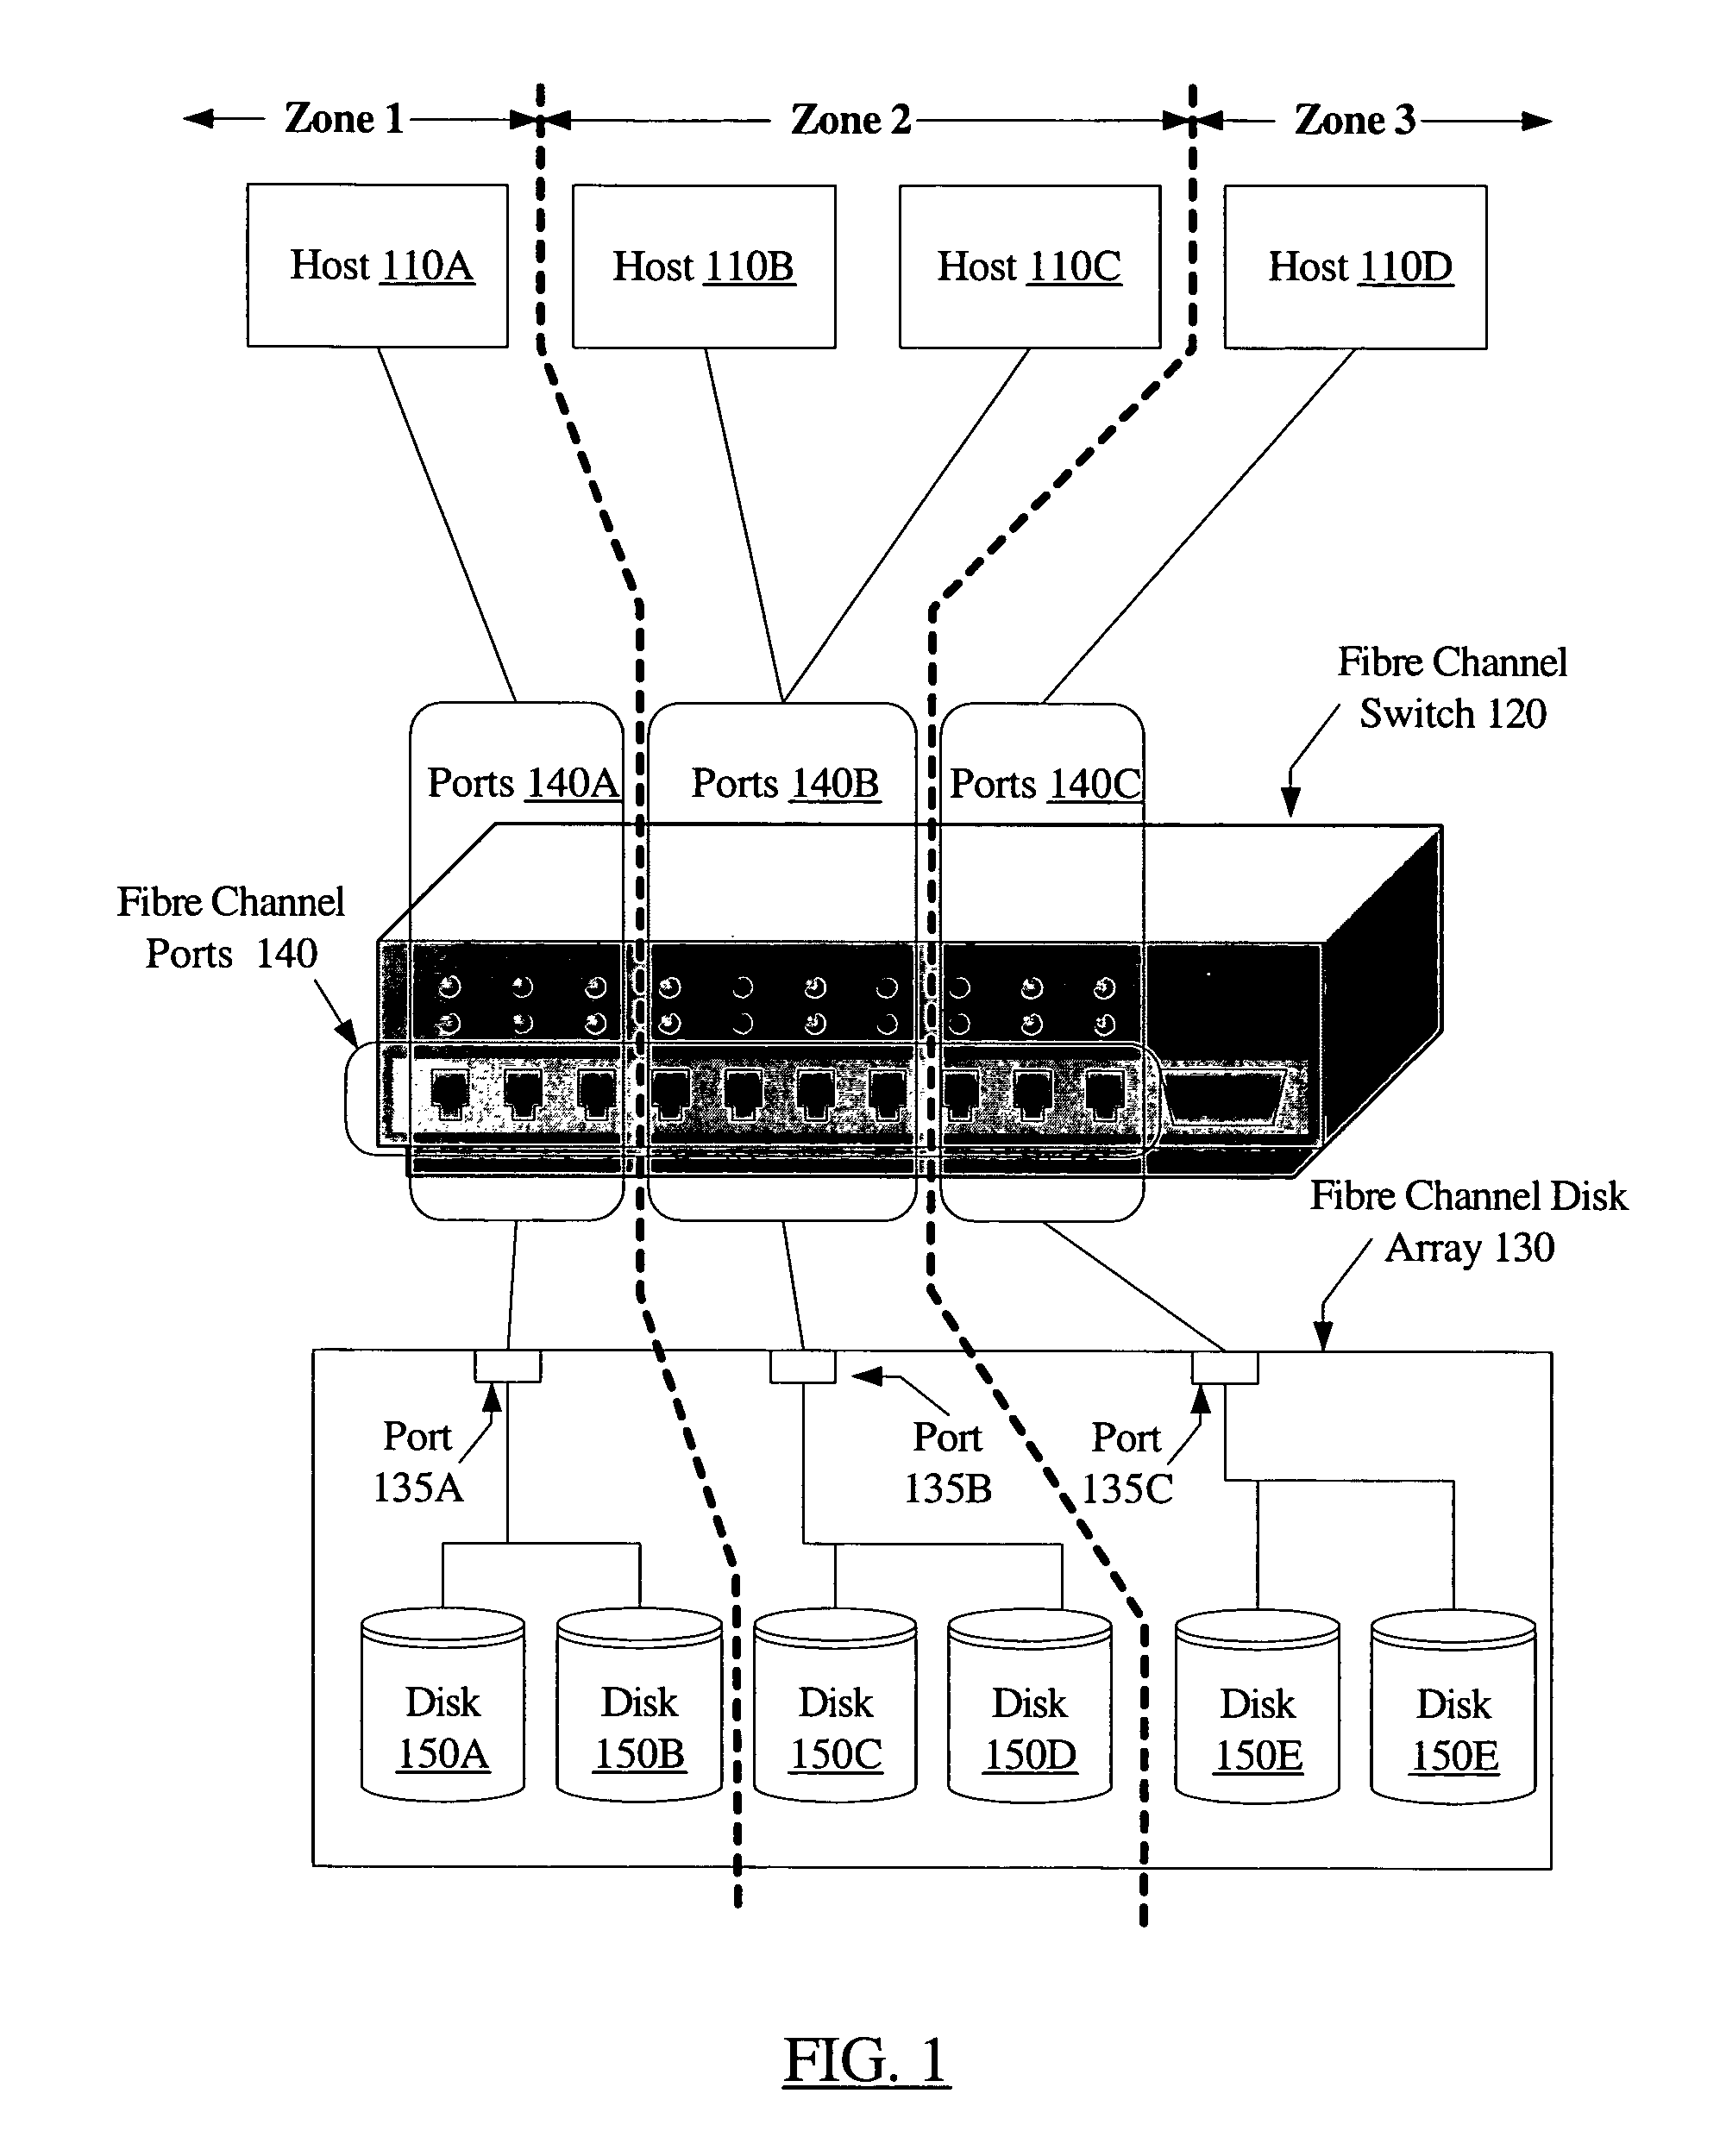 System and method for providing availability using volume server sets in a storage environment employing distributed block virtualization